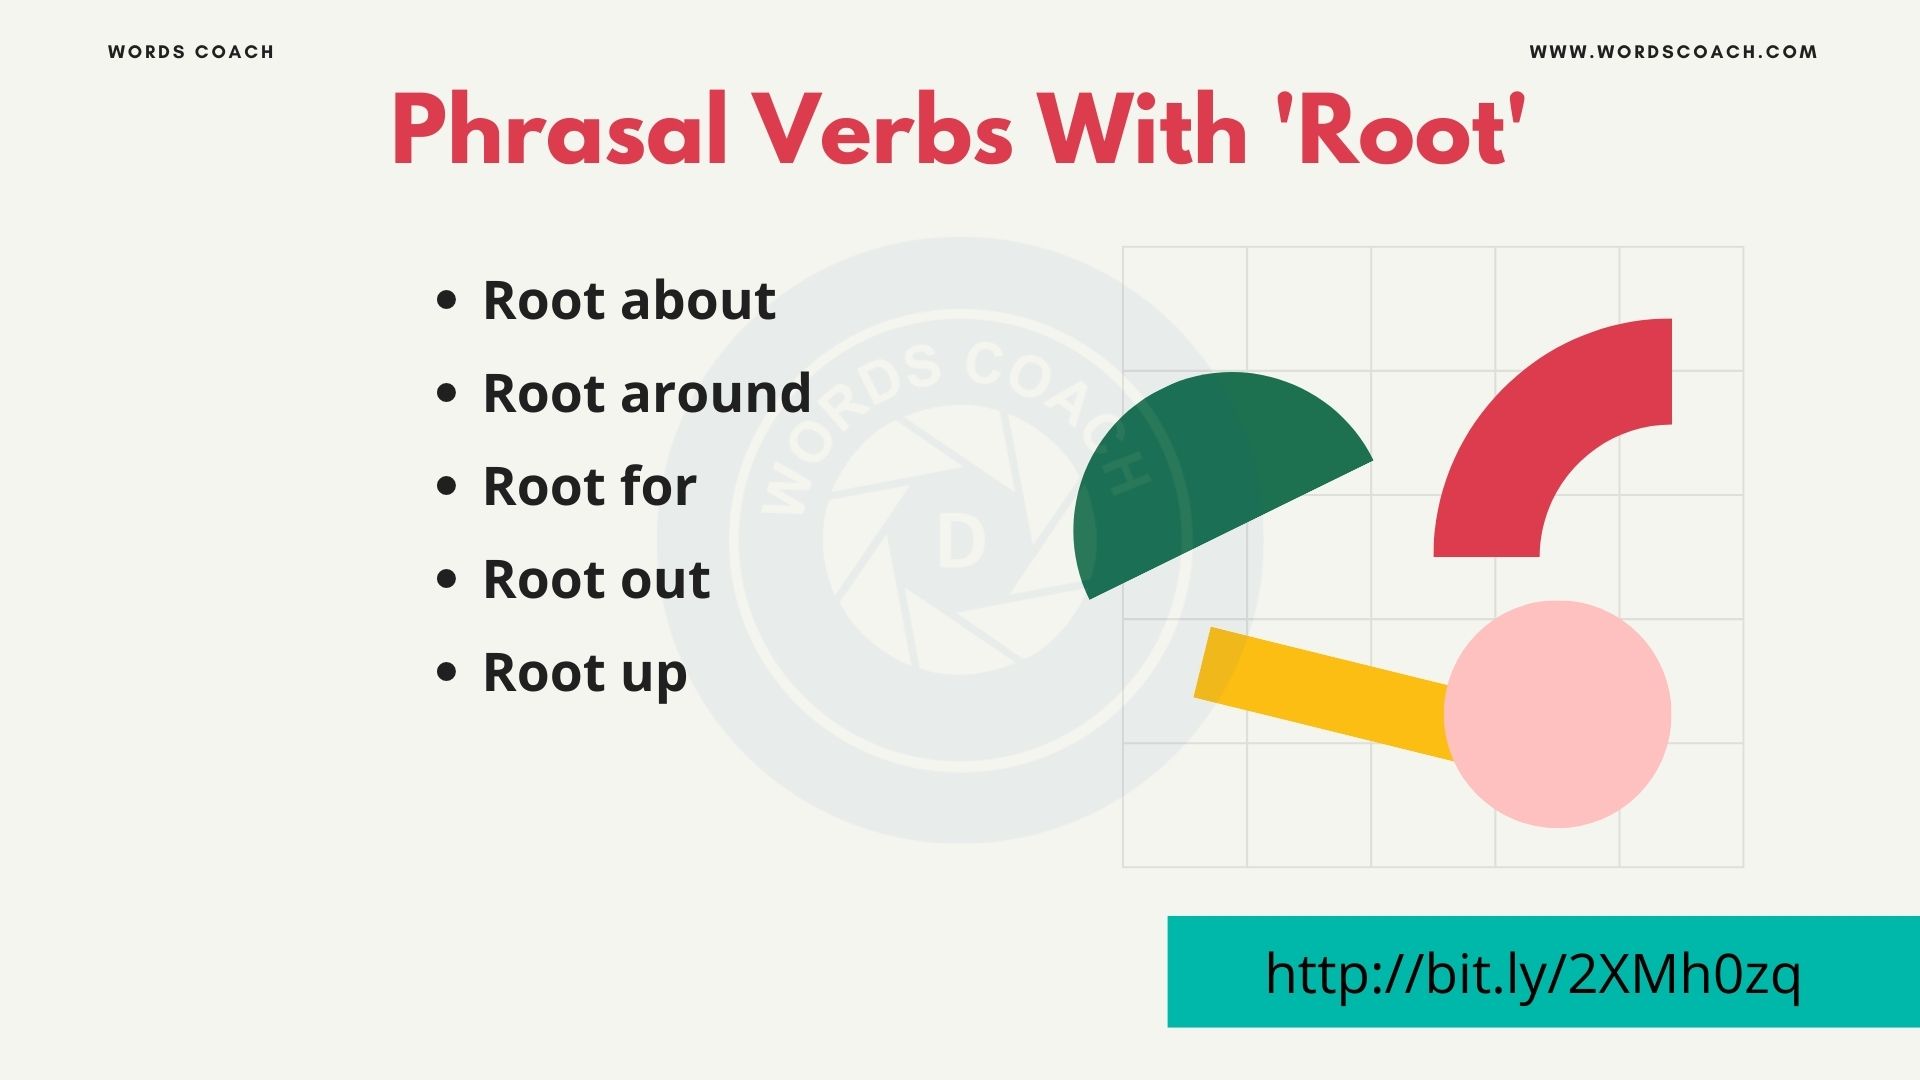 Phrasal Verbs With 'Root'